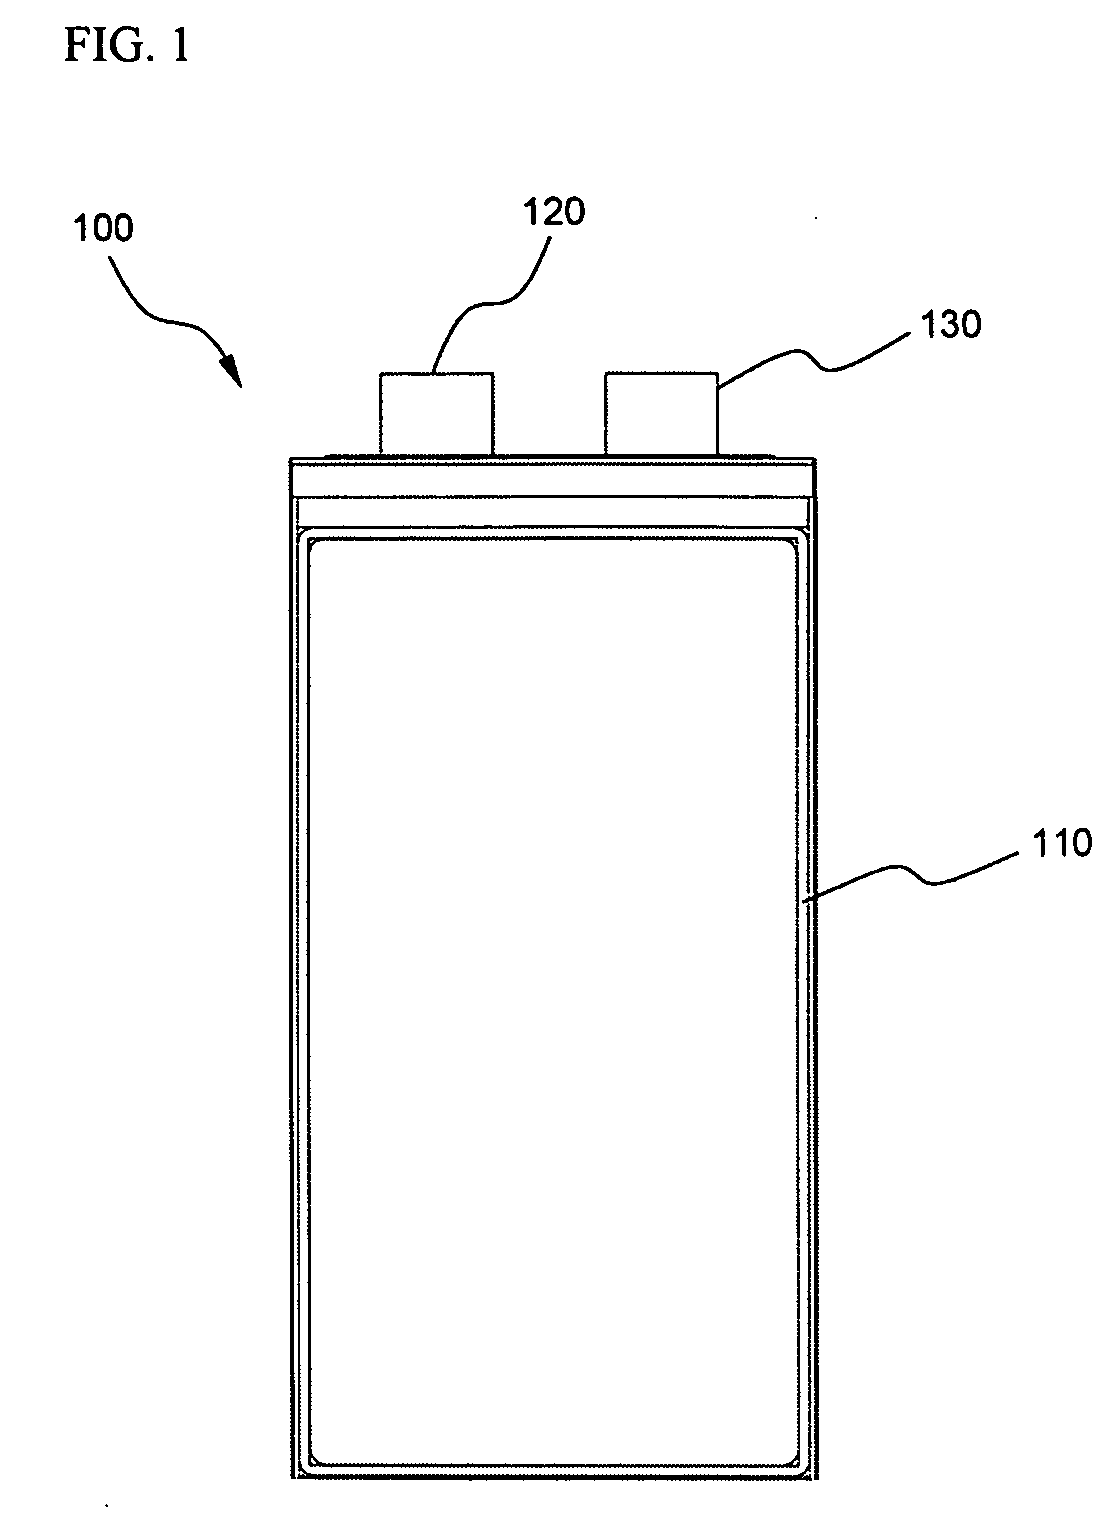 Process for preparation of secondary battery module